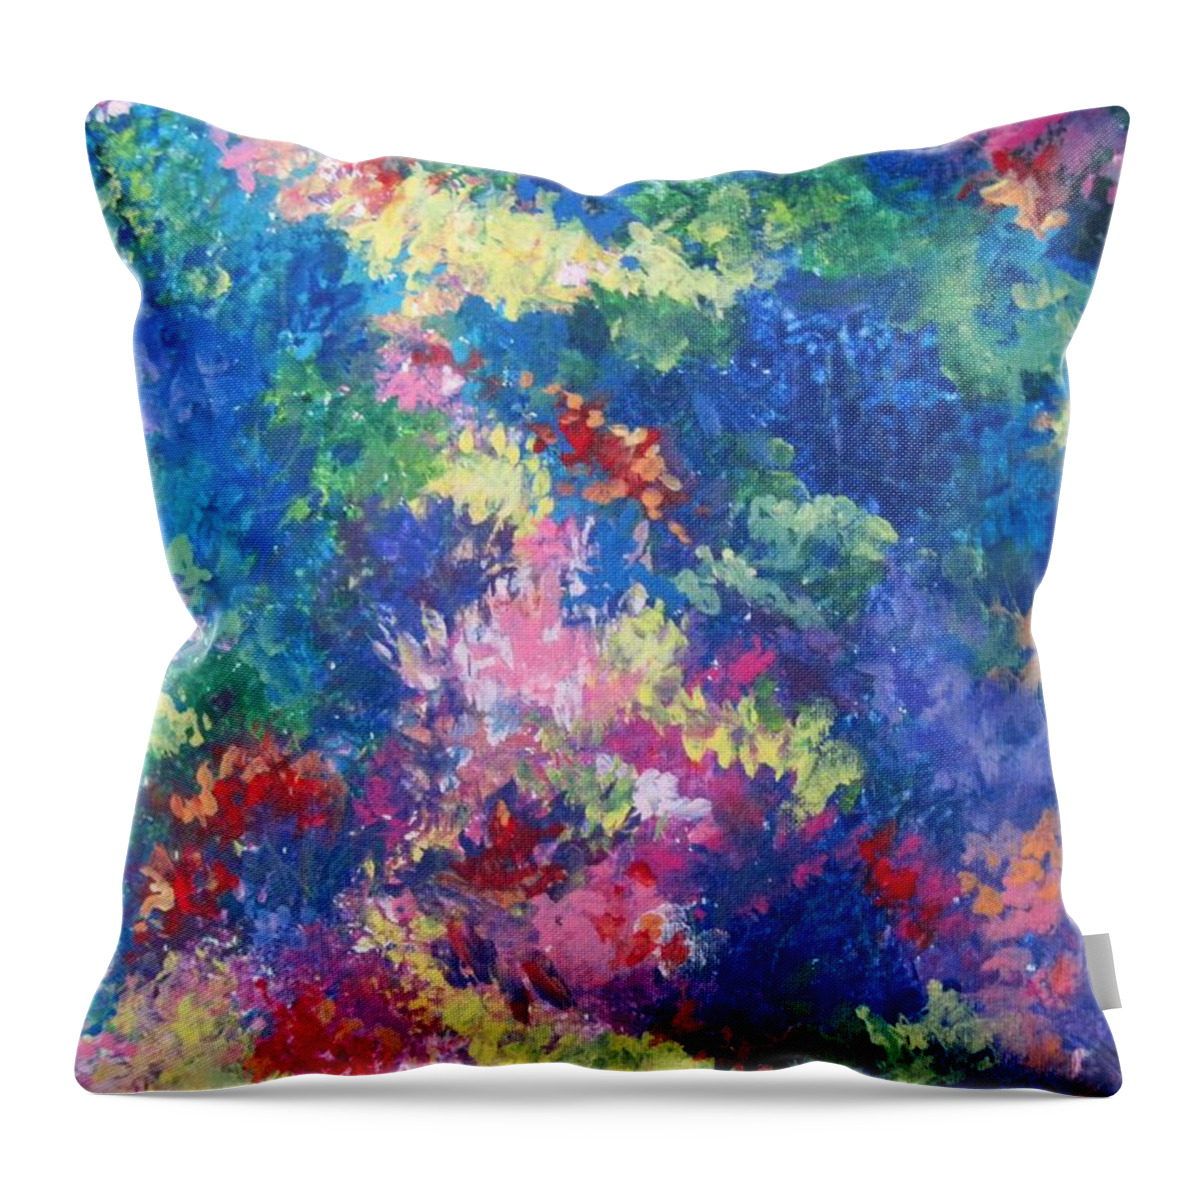 Abstract Throw Pillow featuring the painting Aquarium by Megan Walsh